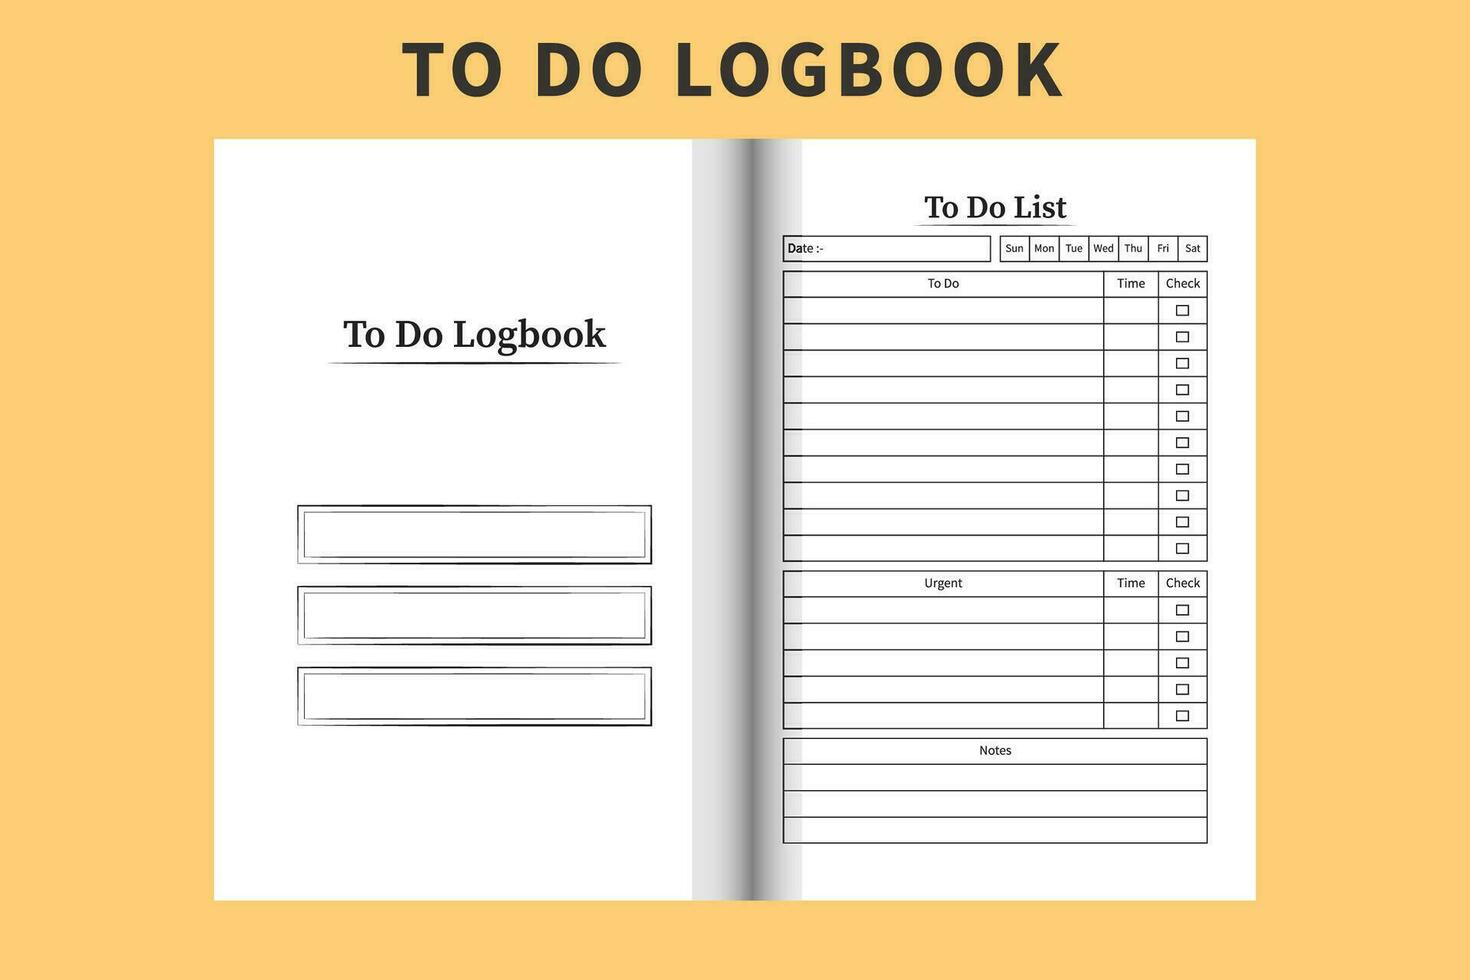 To do list log book interior. Daily task tracker and work progress checklist. To do work list notebook with checkbox. Task planner notebook vector. To do task tracker and work list journal. vector